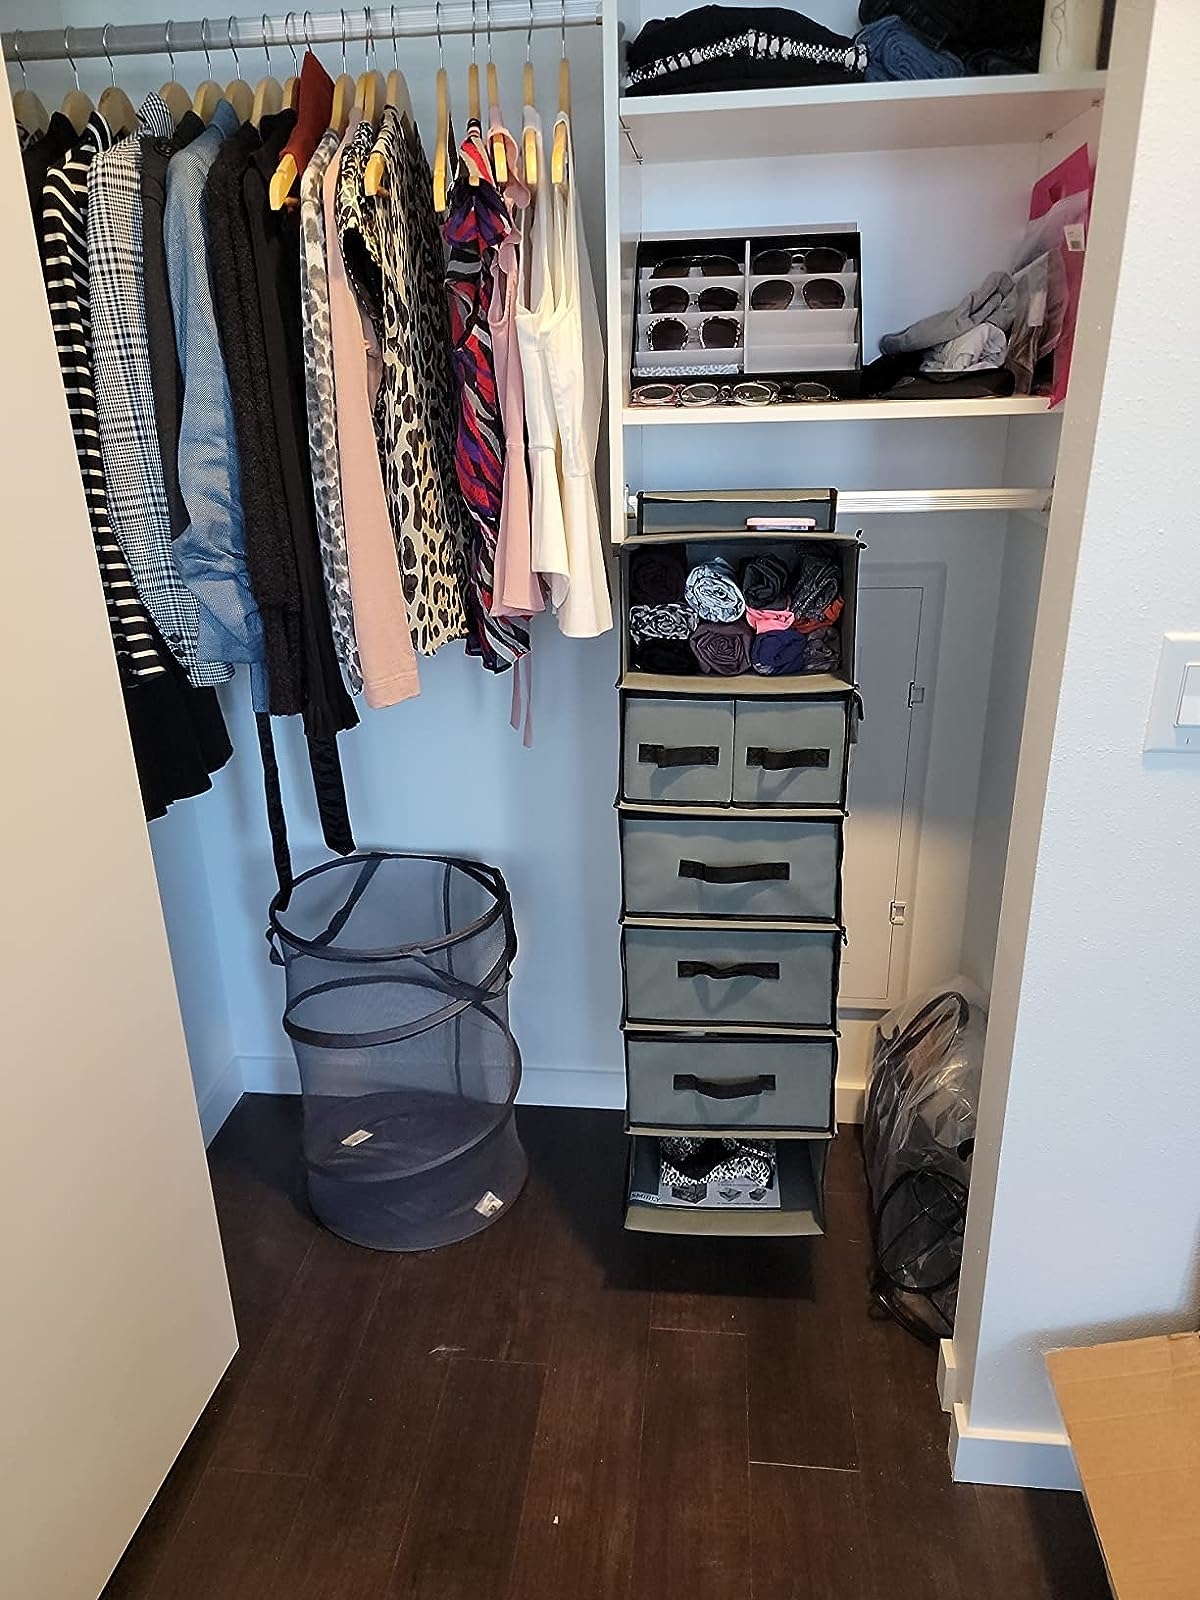 Reviewer image of the organizer hanging in their closet